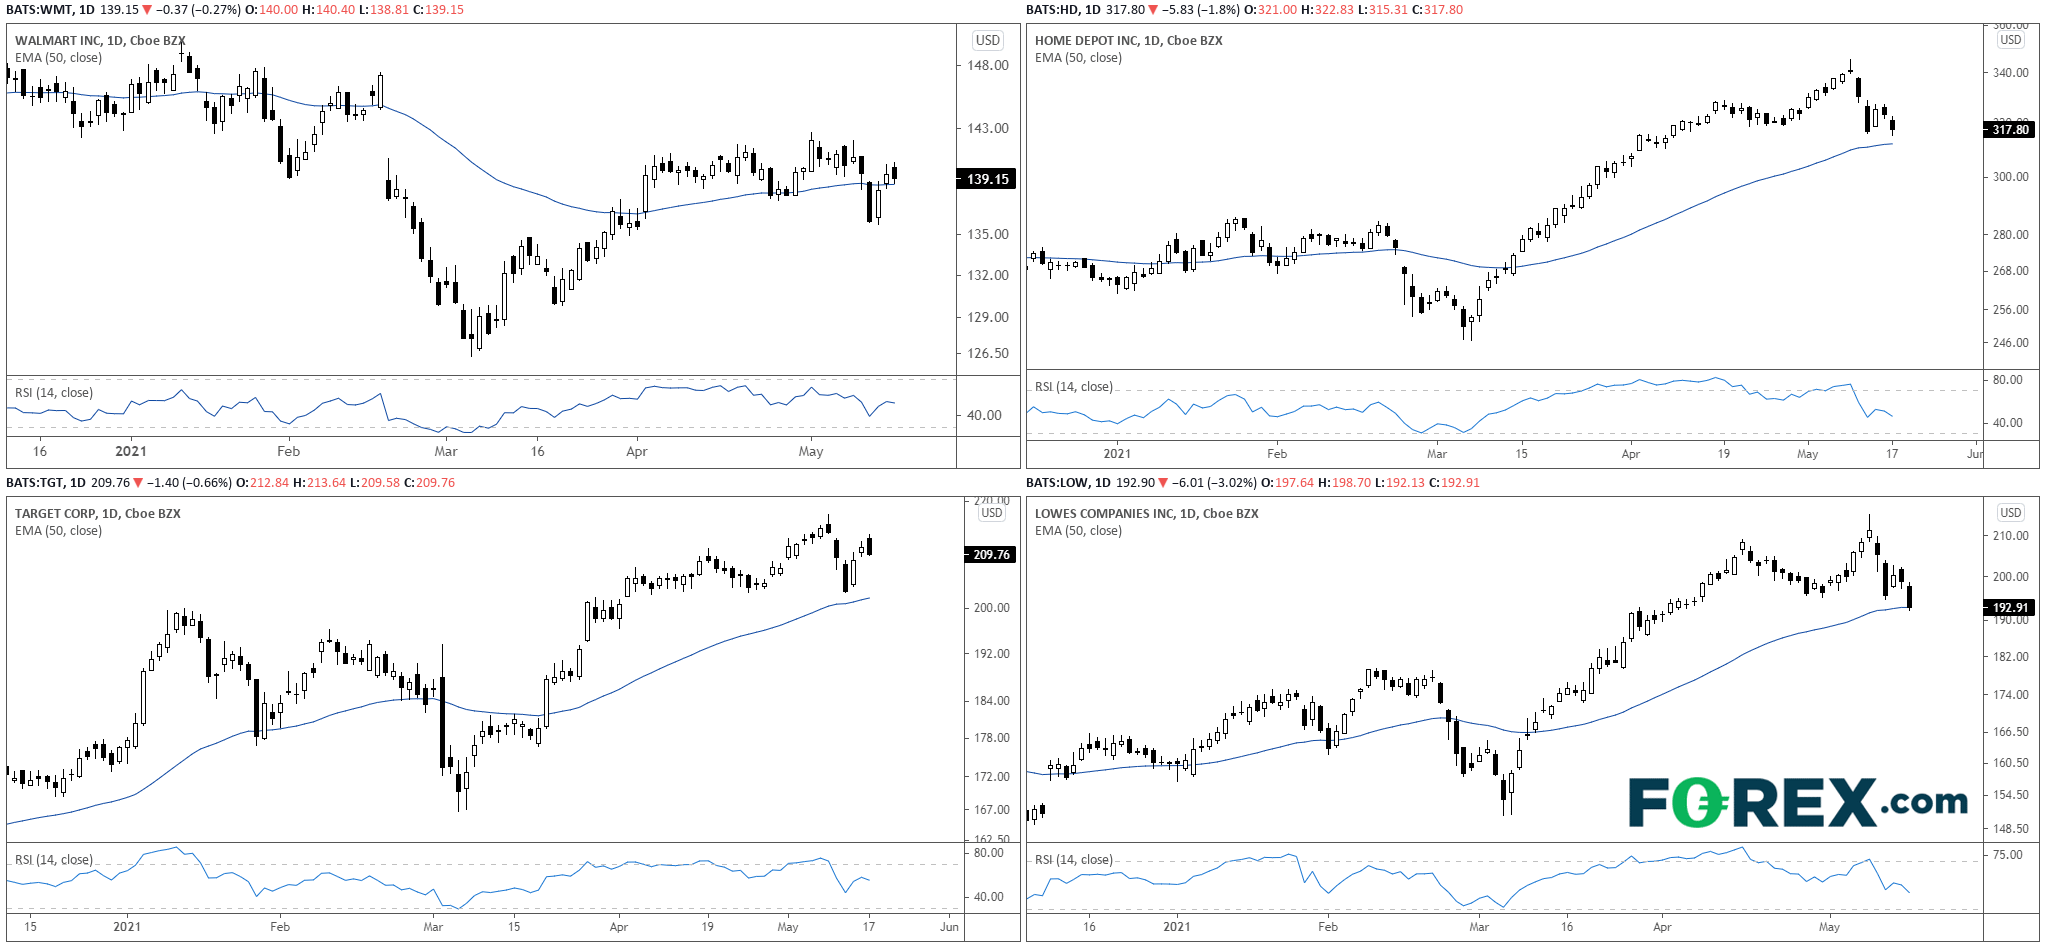 Chart analysis comparing Walmart, Home Depot, Target and Lowes. Published in May 2021 by FOREX.com